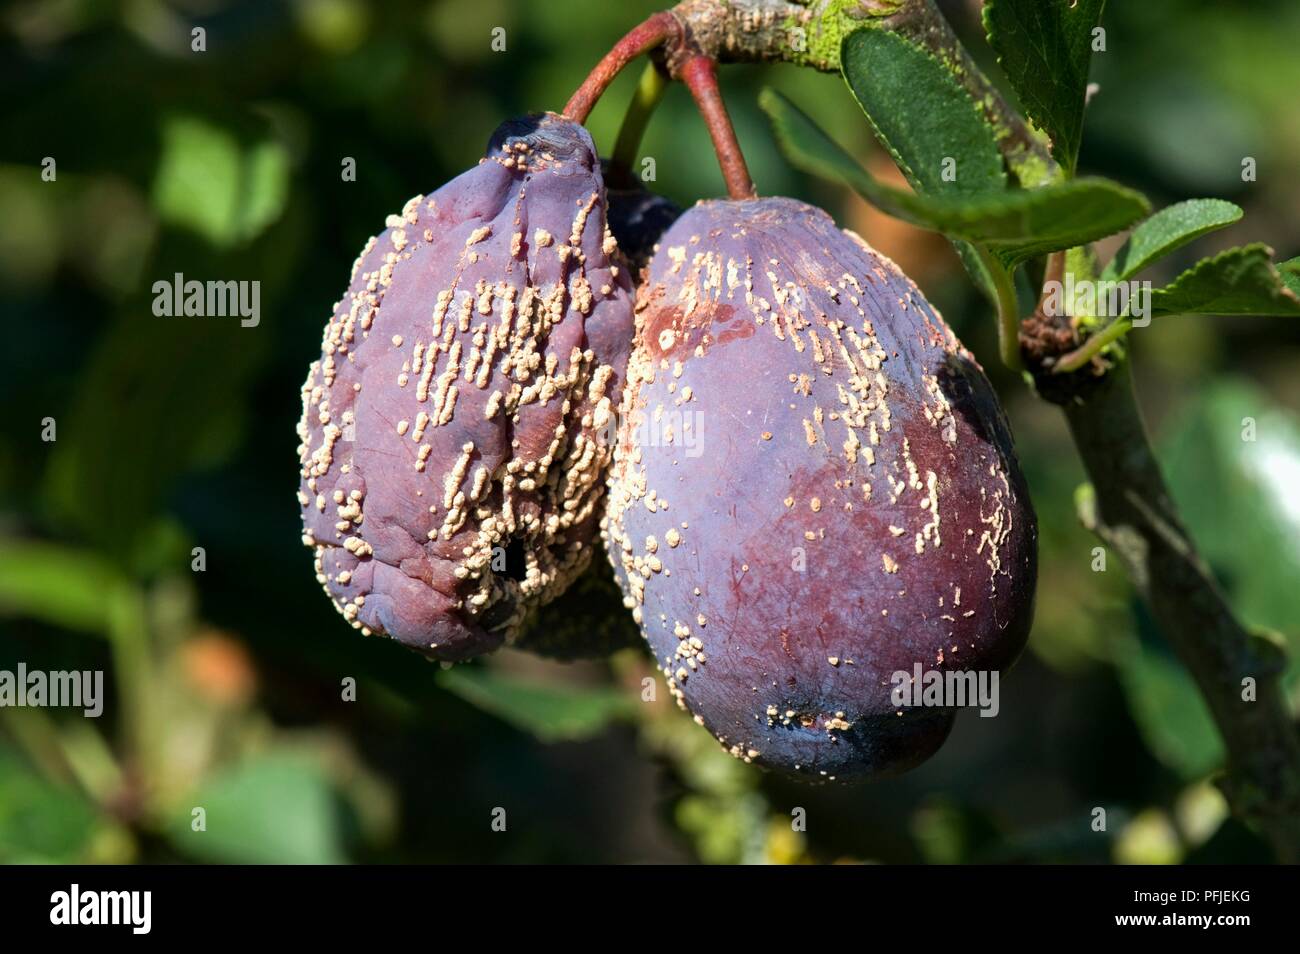 Plums damaged by brown rot Stock Photo